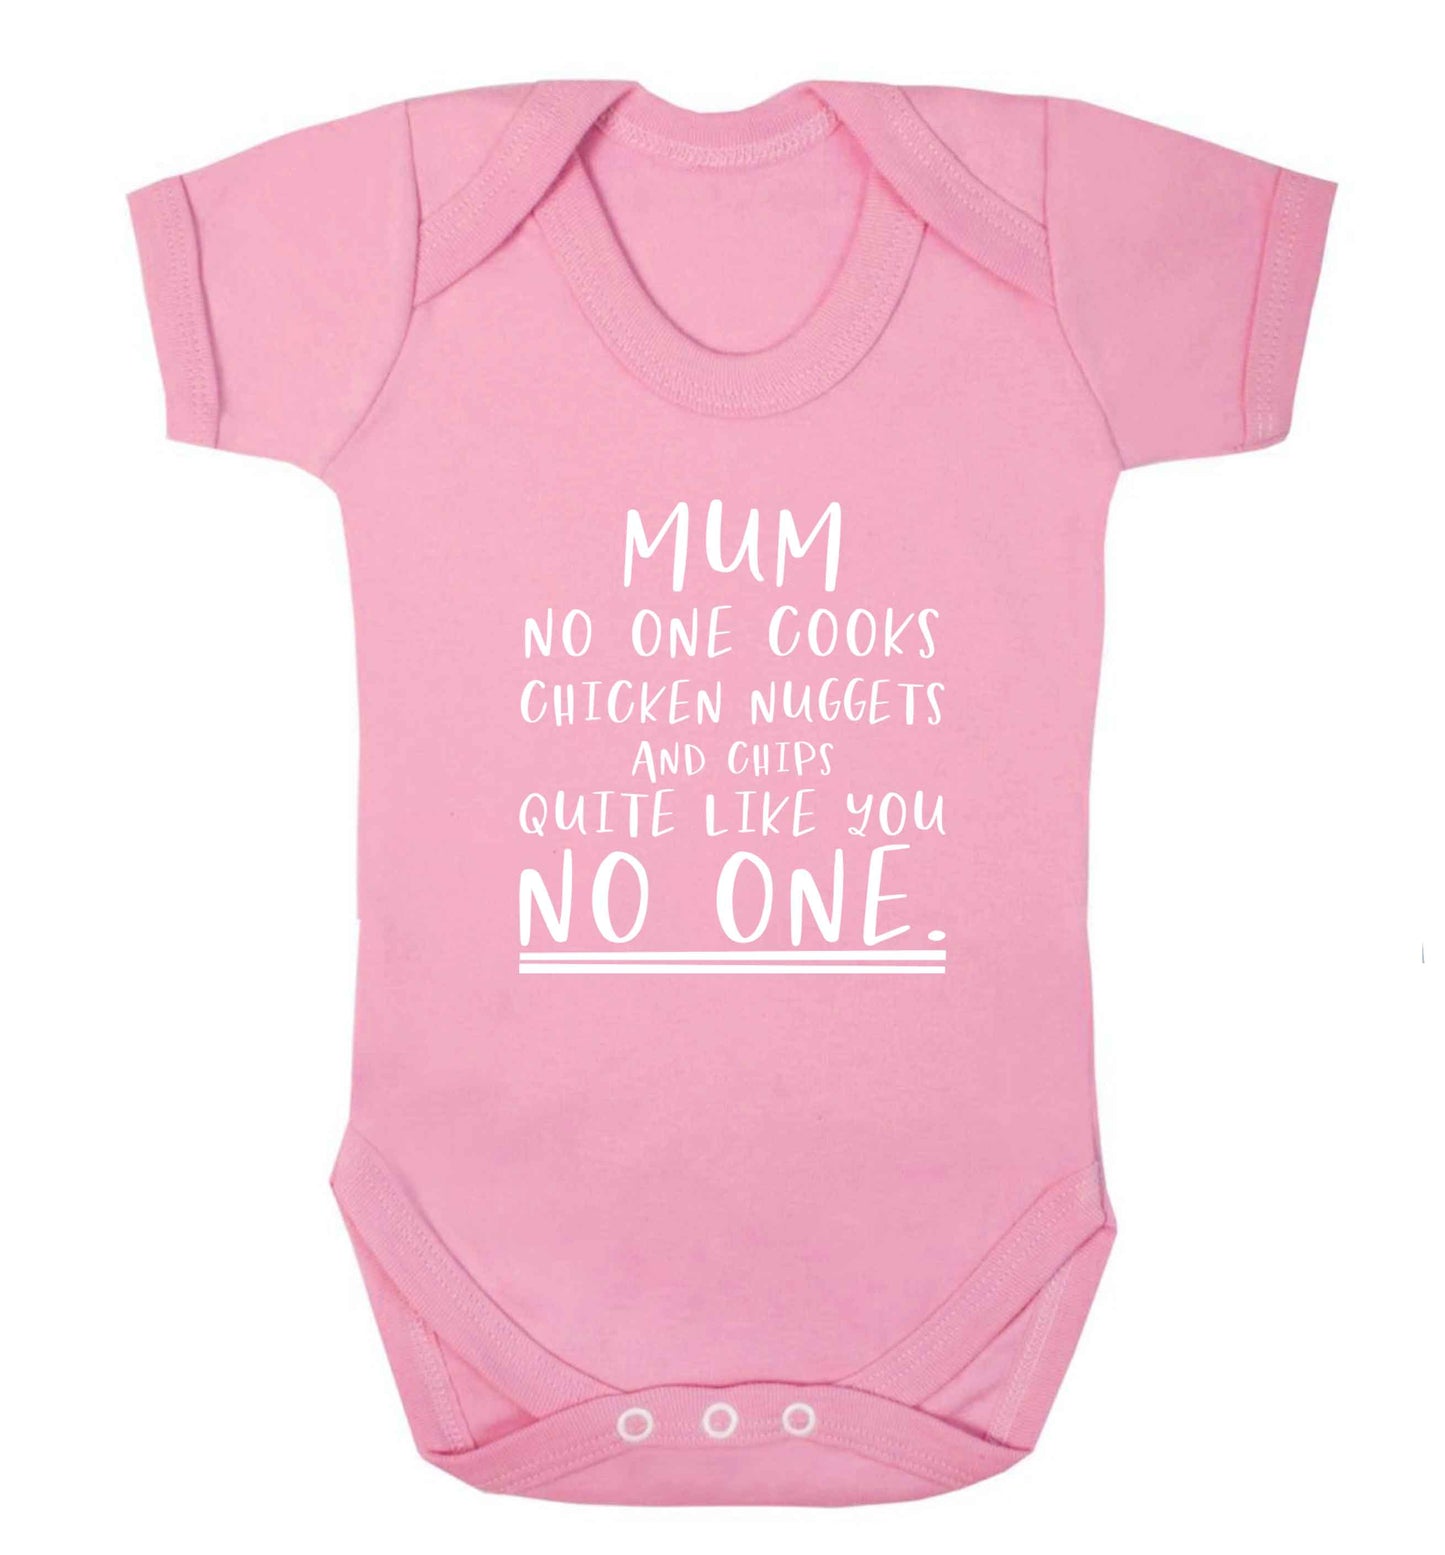 Super funny sassy gift for mother's day or birthday!  Mum no one cooks chicken nuggets and chips like you no one baby vest pale pink 18-24 months